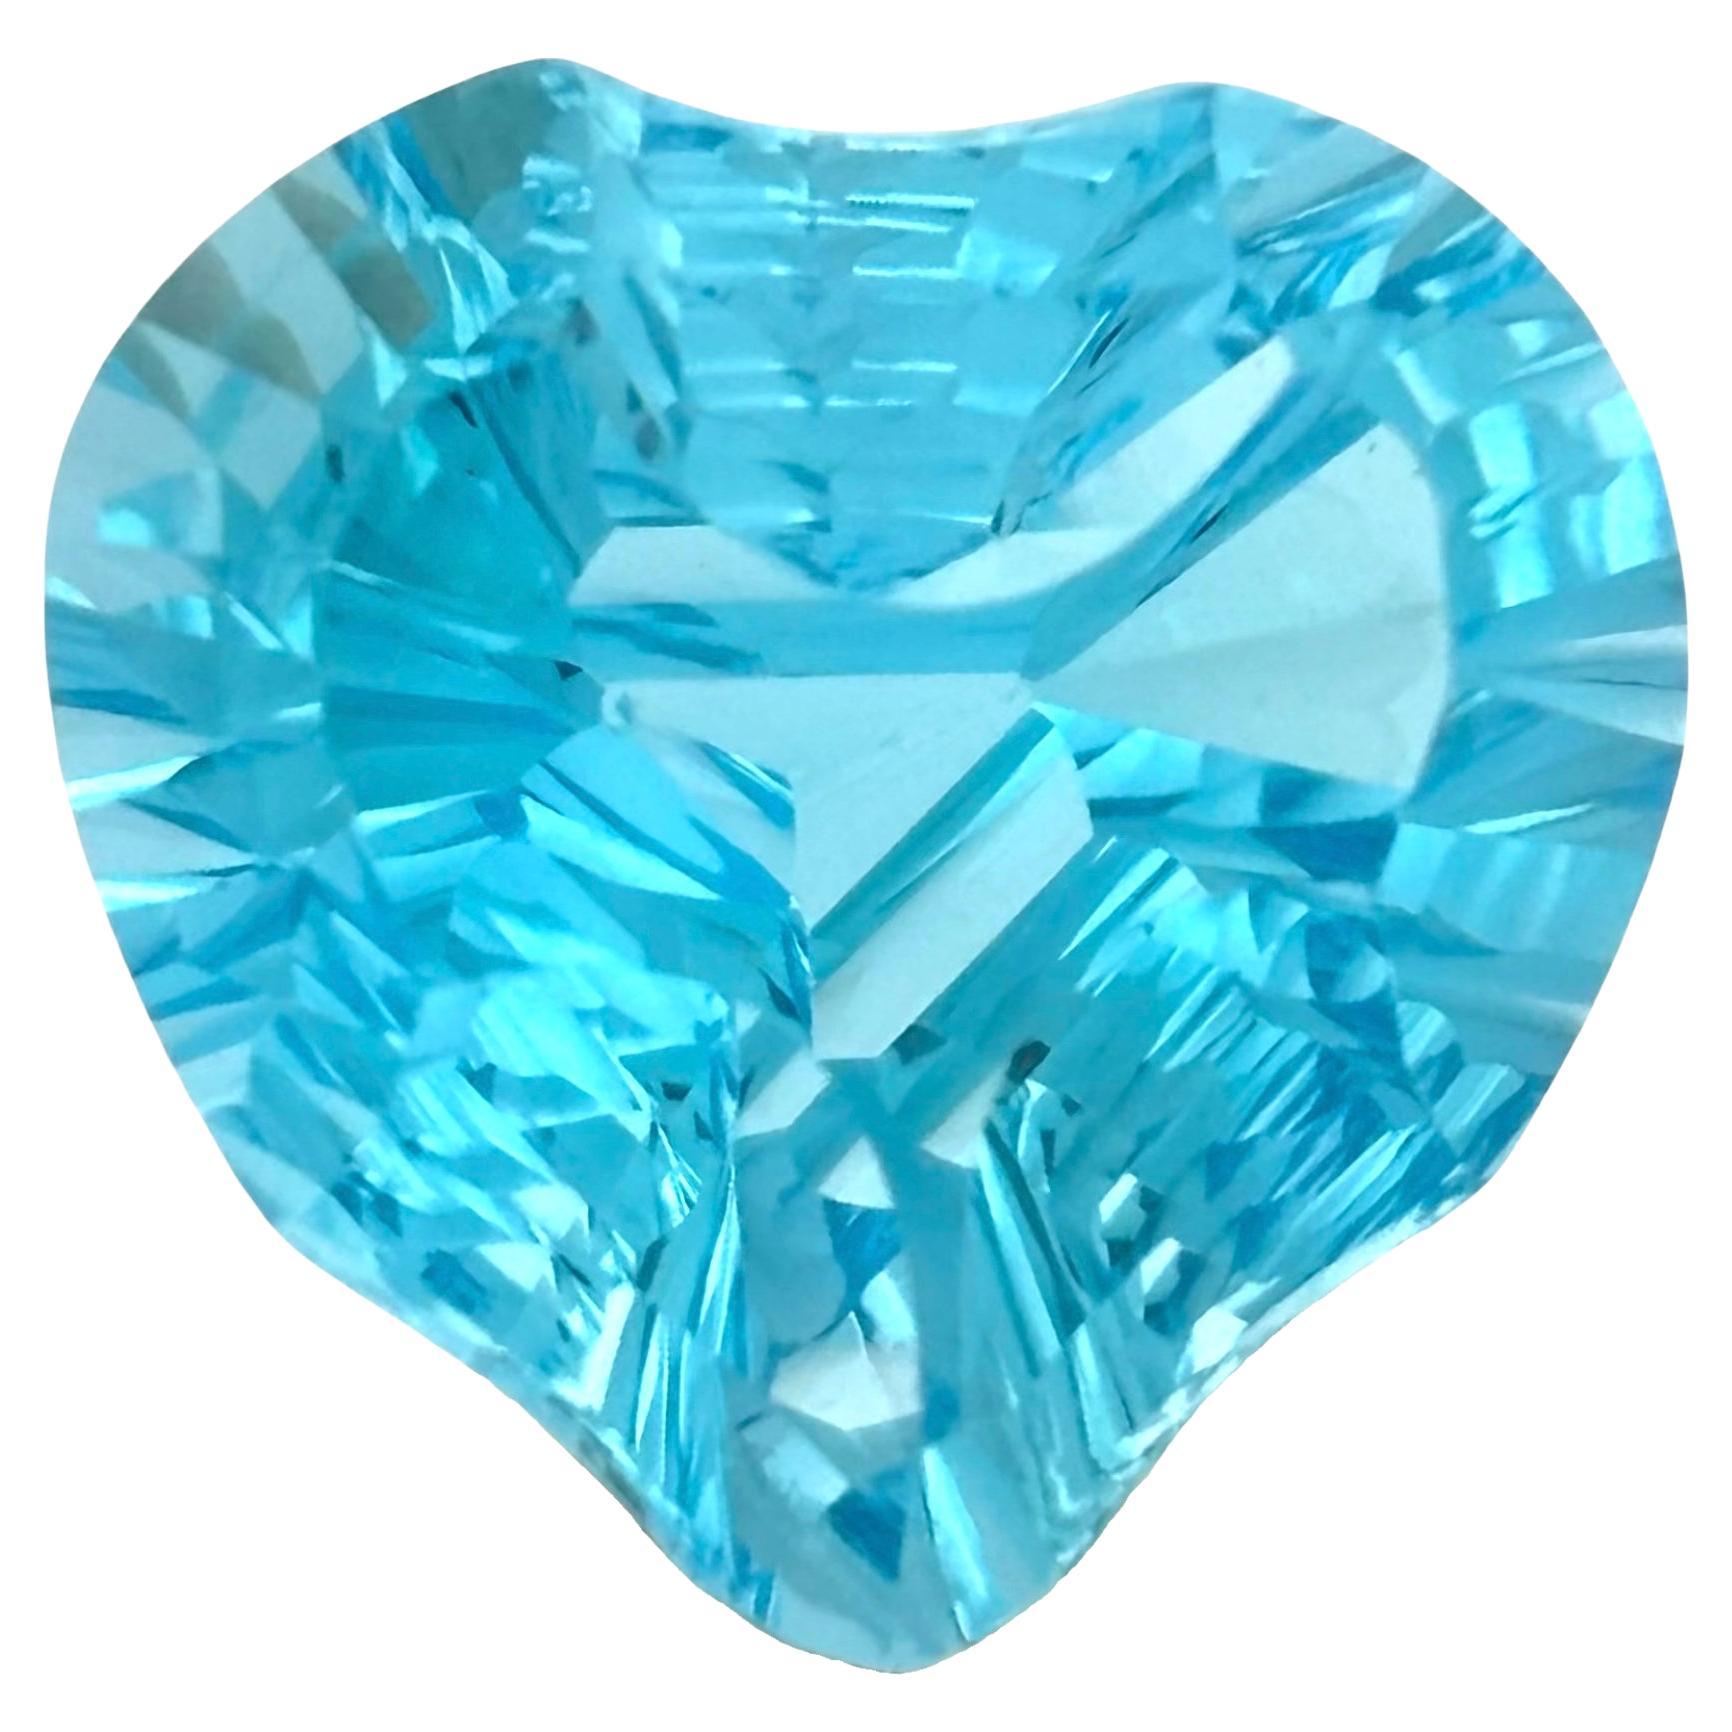 24.12 Carat Natural Blue Heart Shaped Topaz Stone For Sale